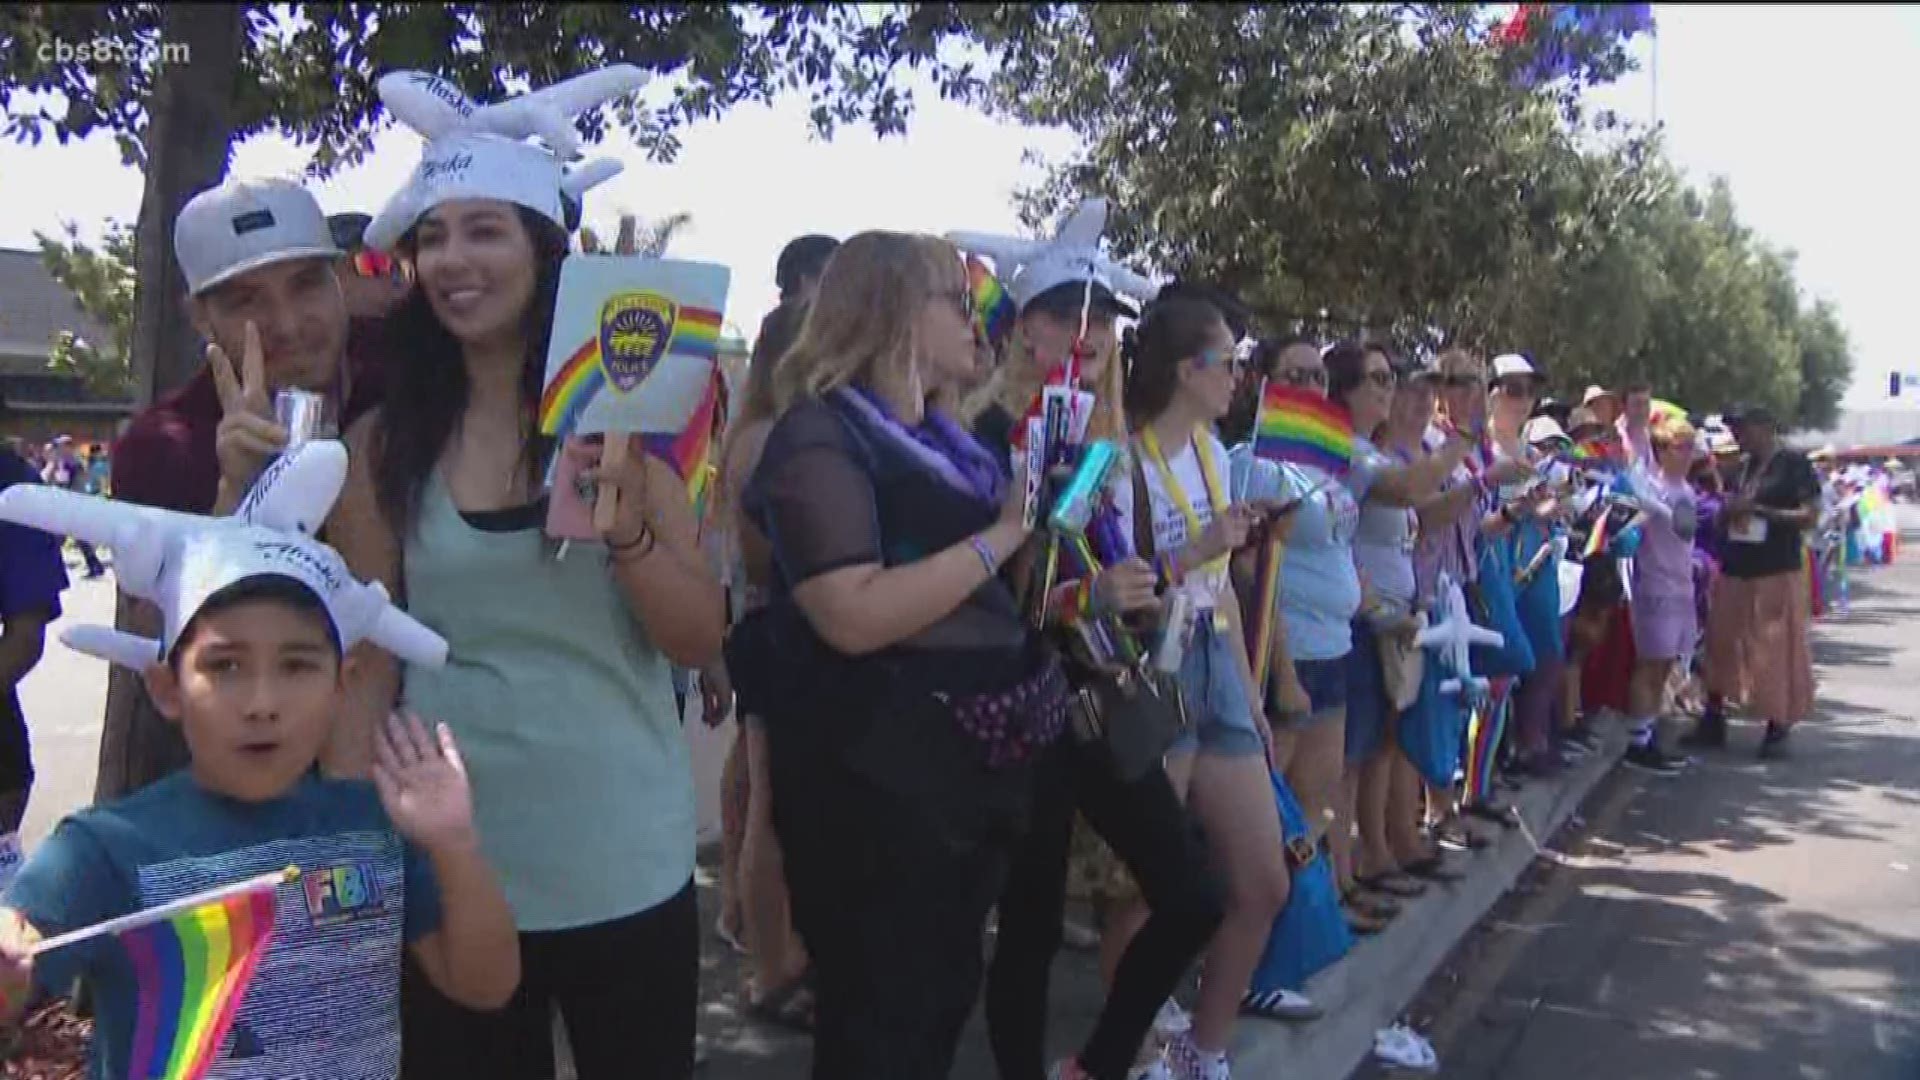 According to San Diego Pride, the parade is the sixth largest Pride event in the U.S. and attracts more than 250,000 people each year.